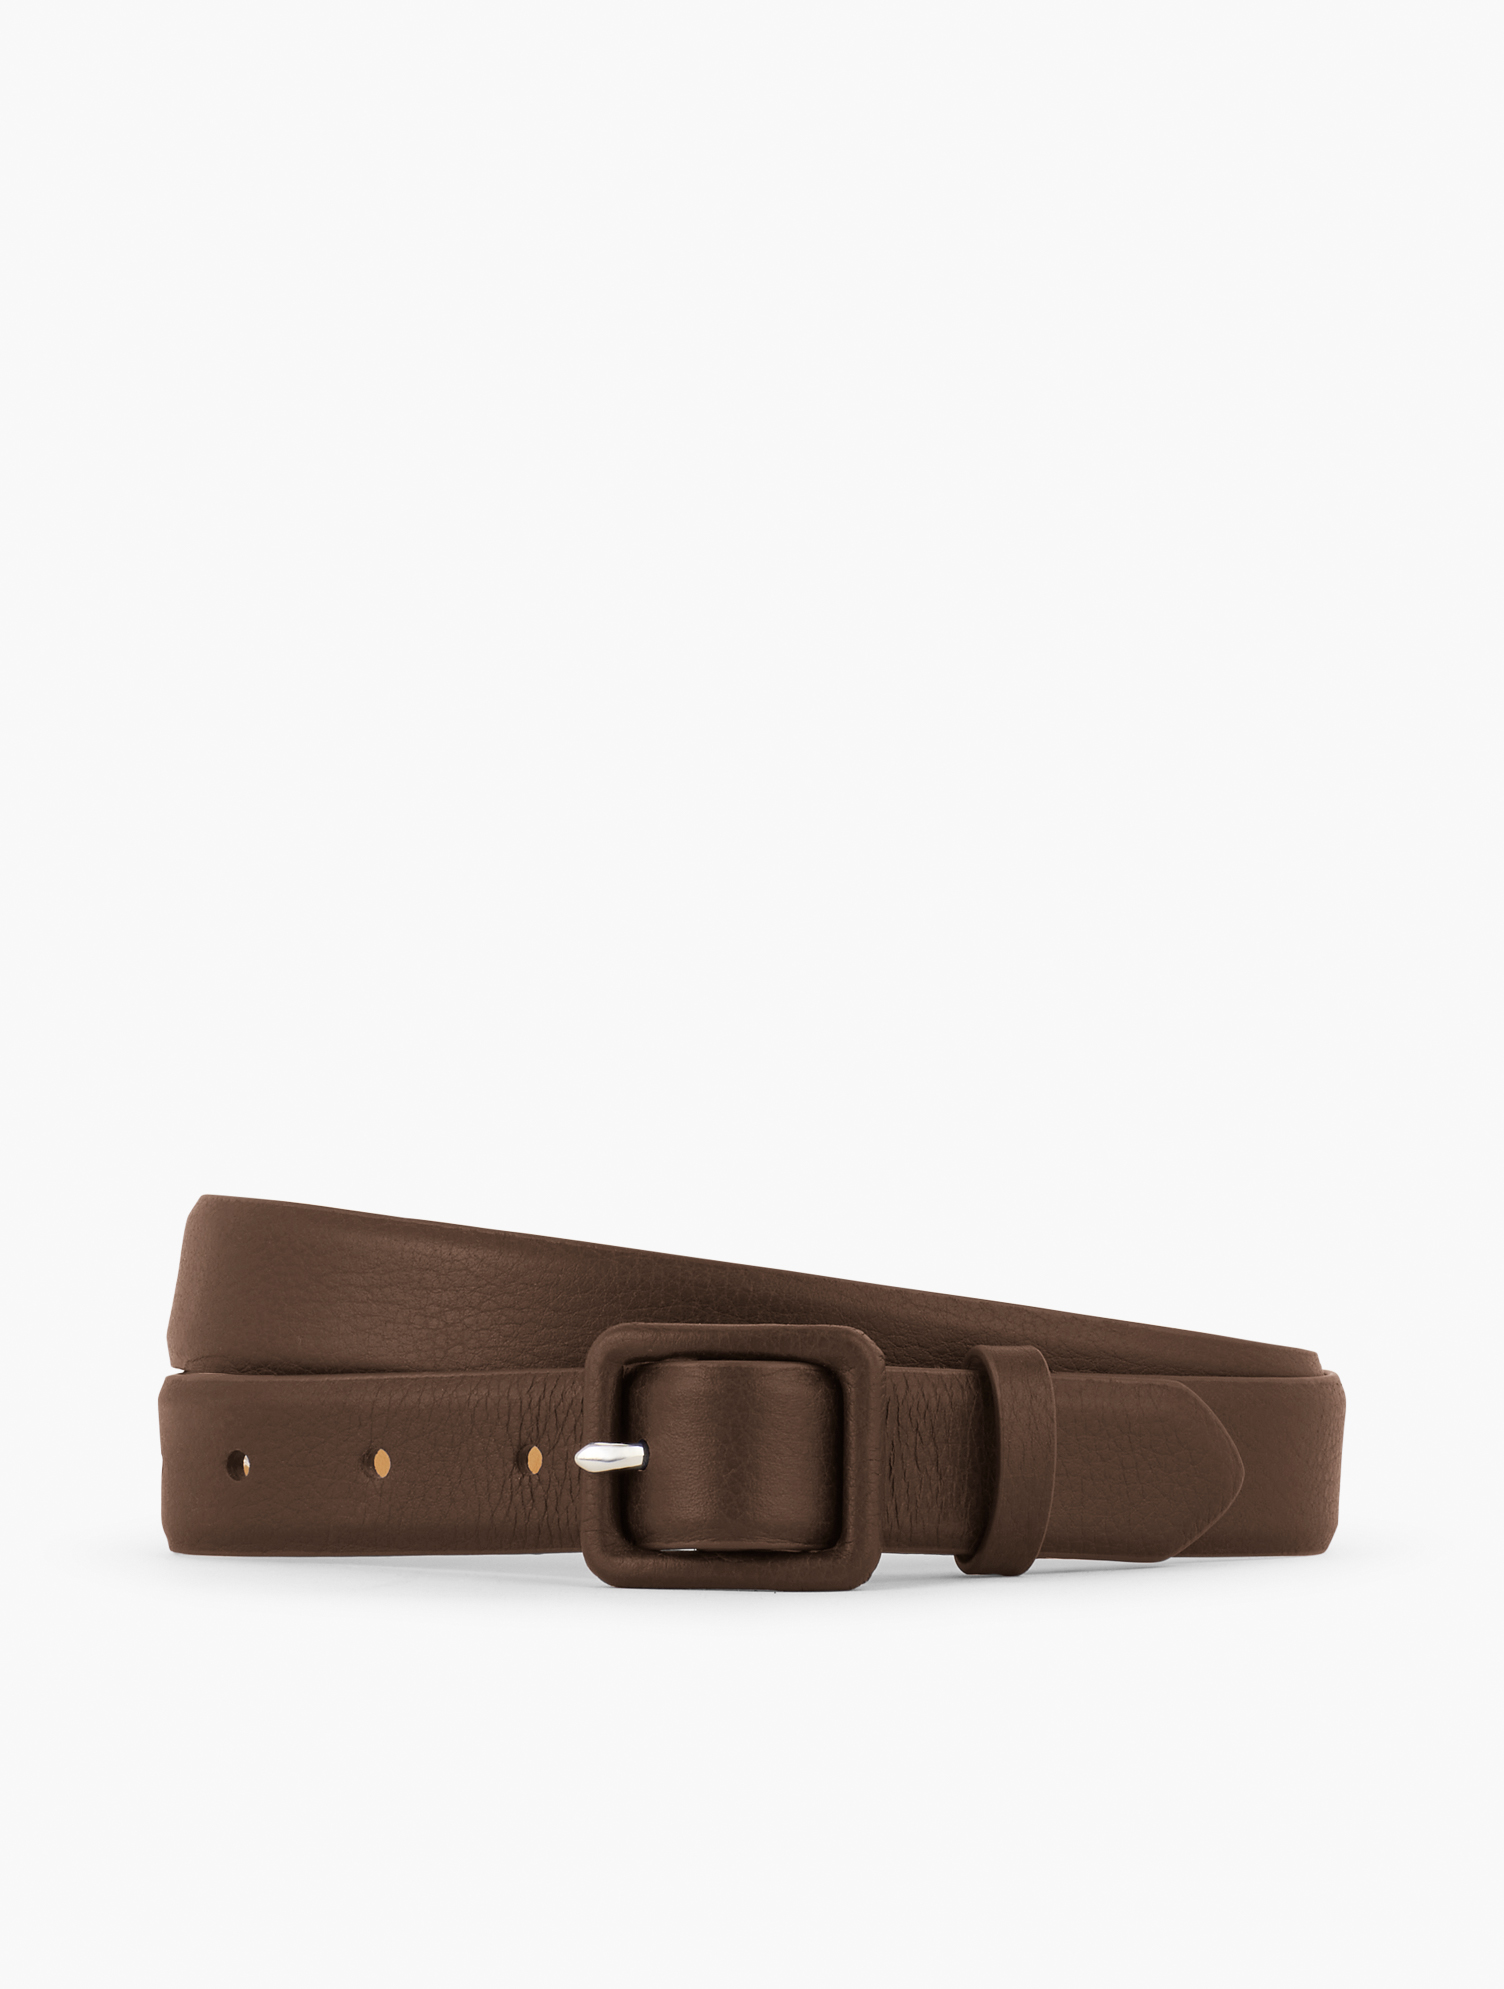 Talbots Soft Pebble Leather Covered Buckle Belt - Dark Brown - Xs